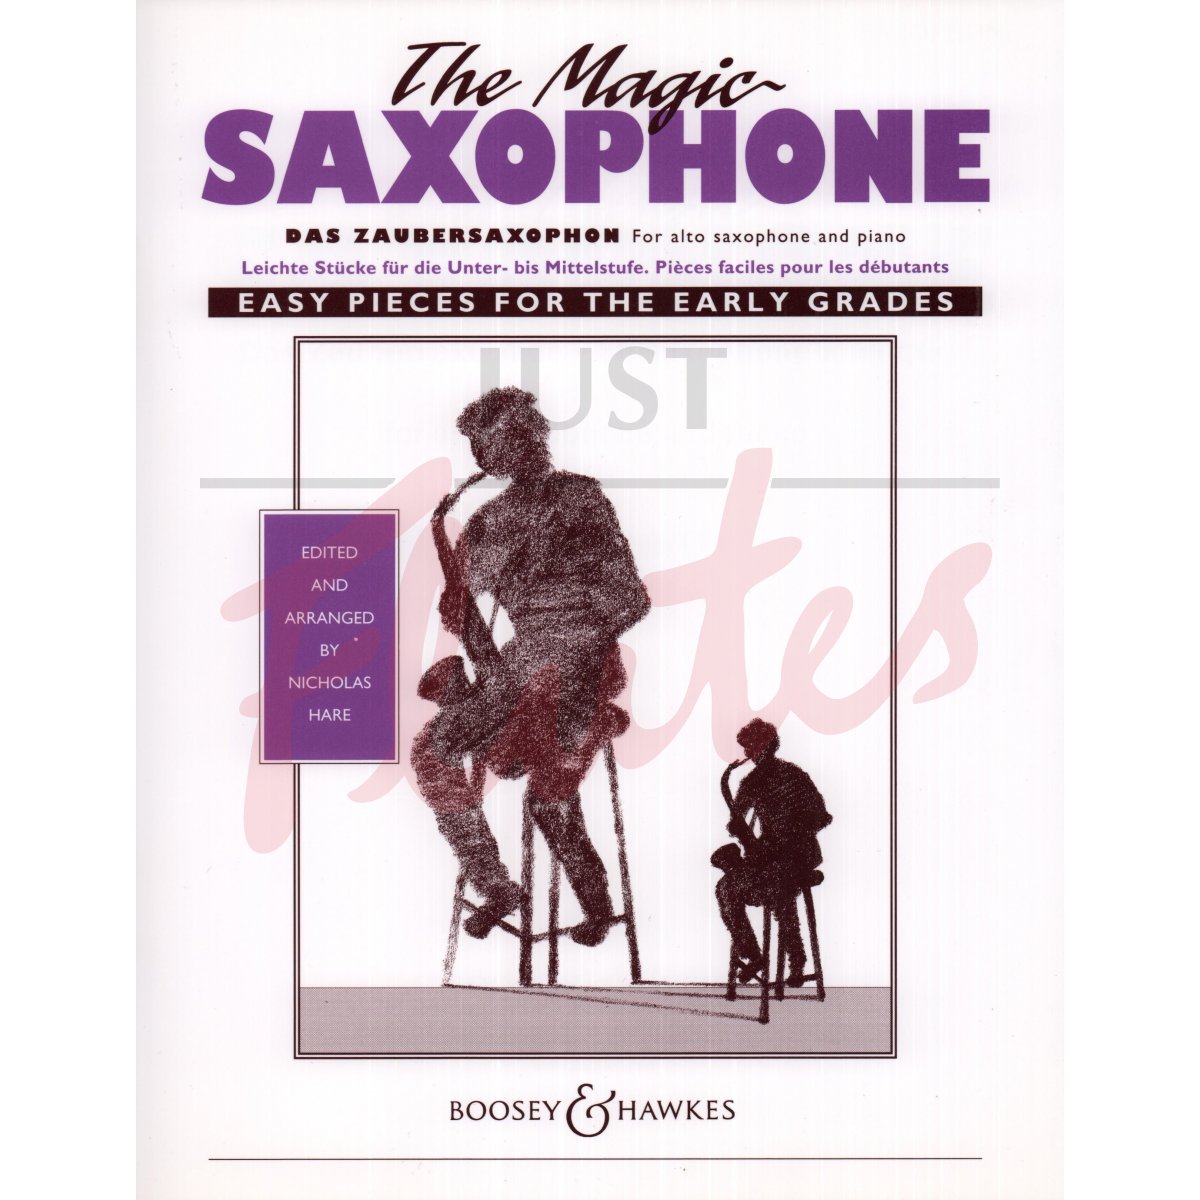 The Magic Saxophone: Easy Pieces for the Early Grades for Saxophone and Piano